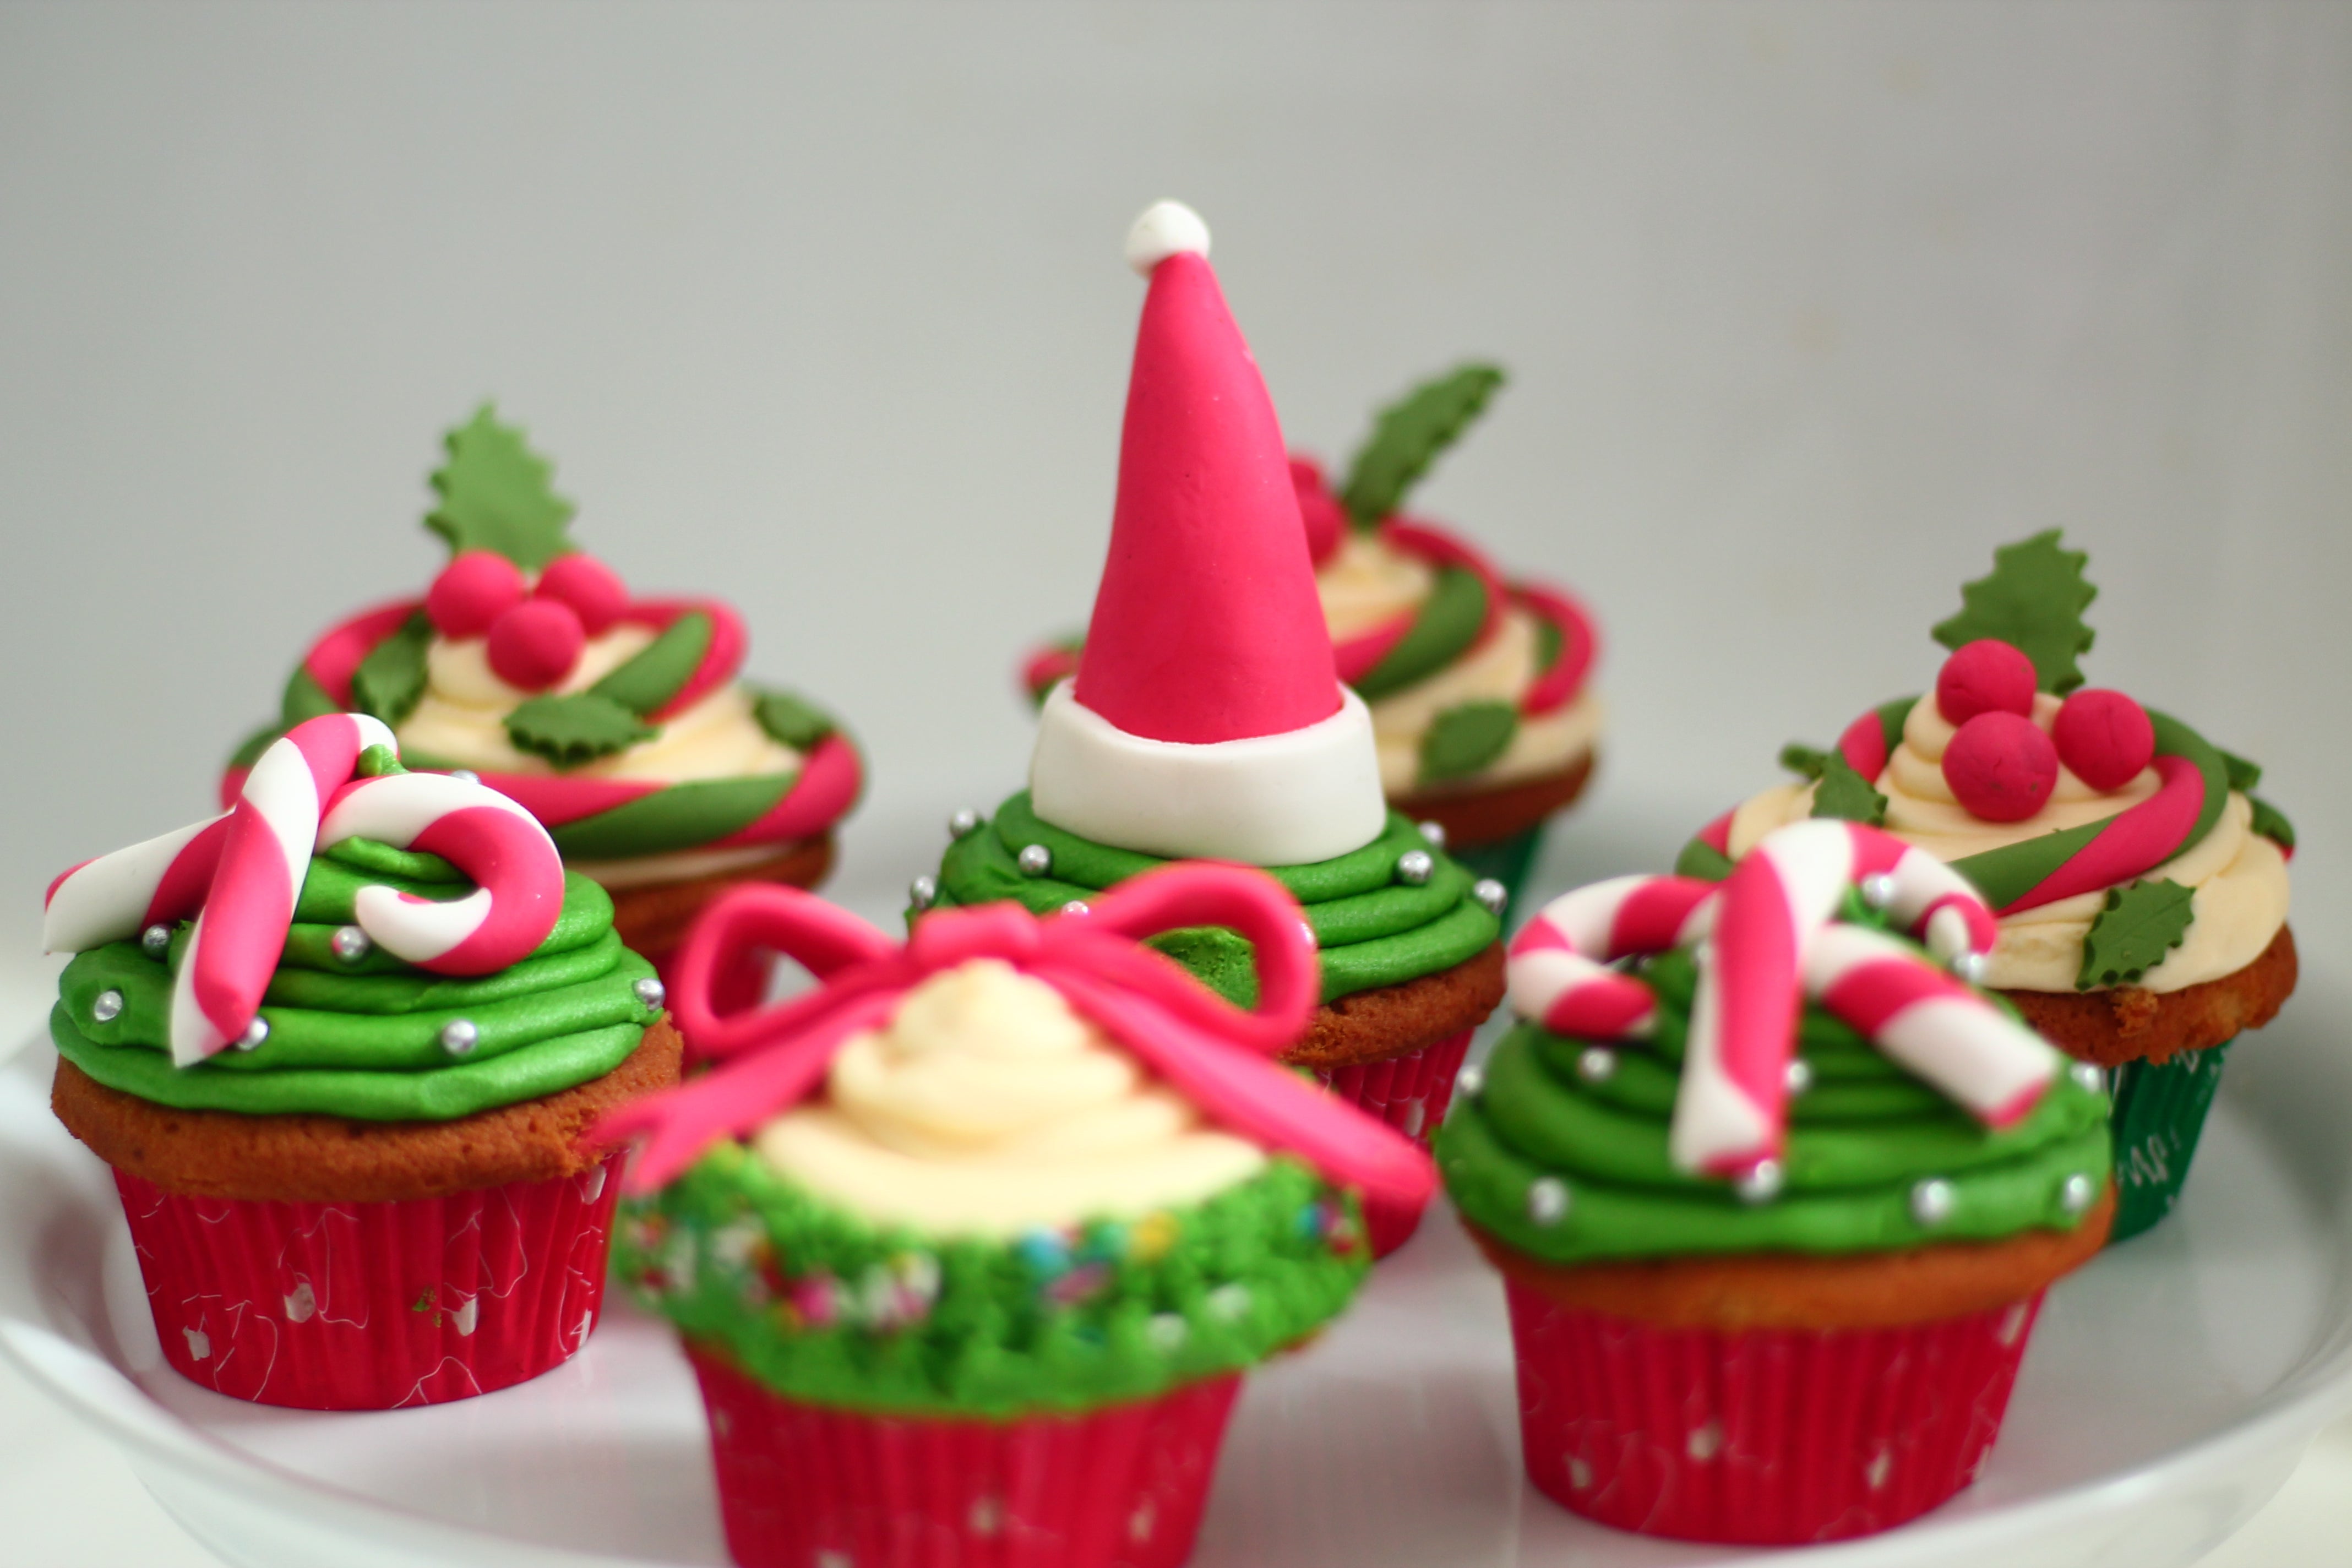 How to Make a Christmas Tree Cake Out of Cupcakes | Beyond Frosting